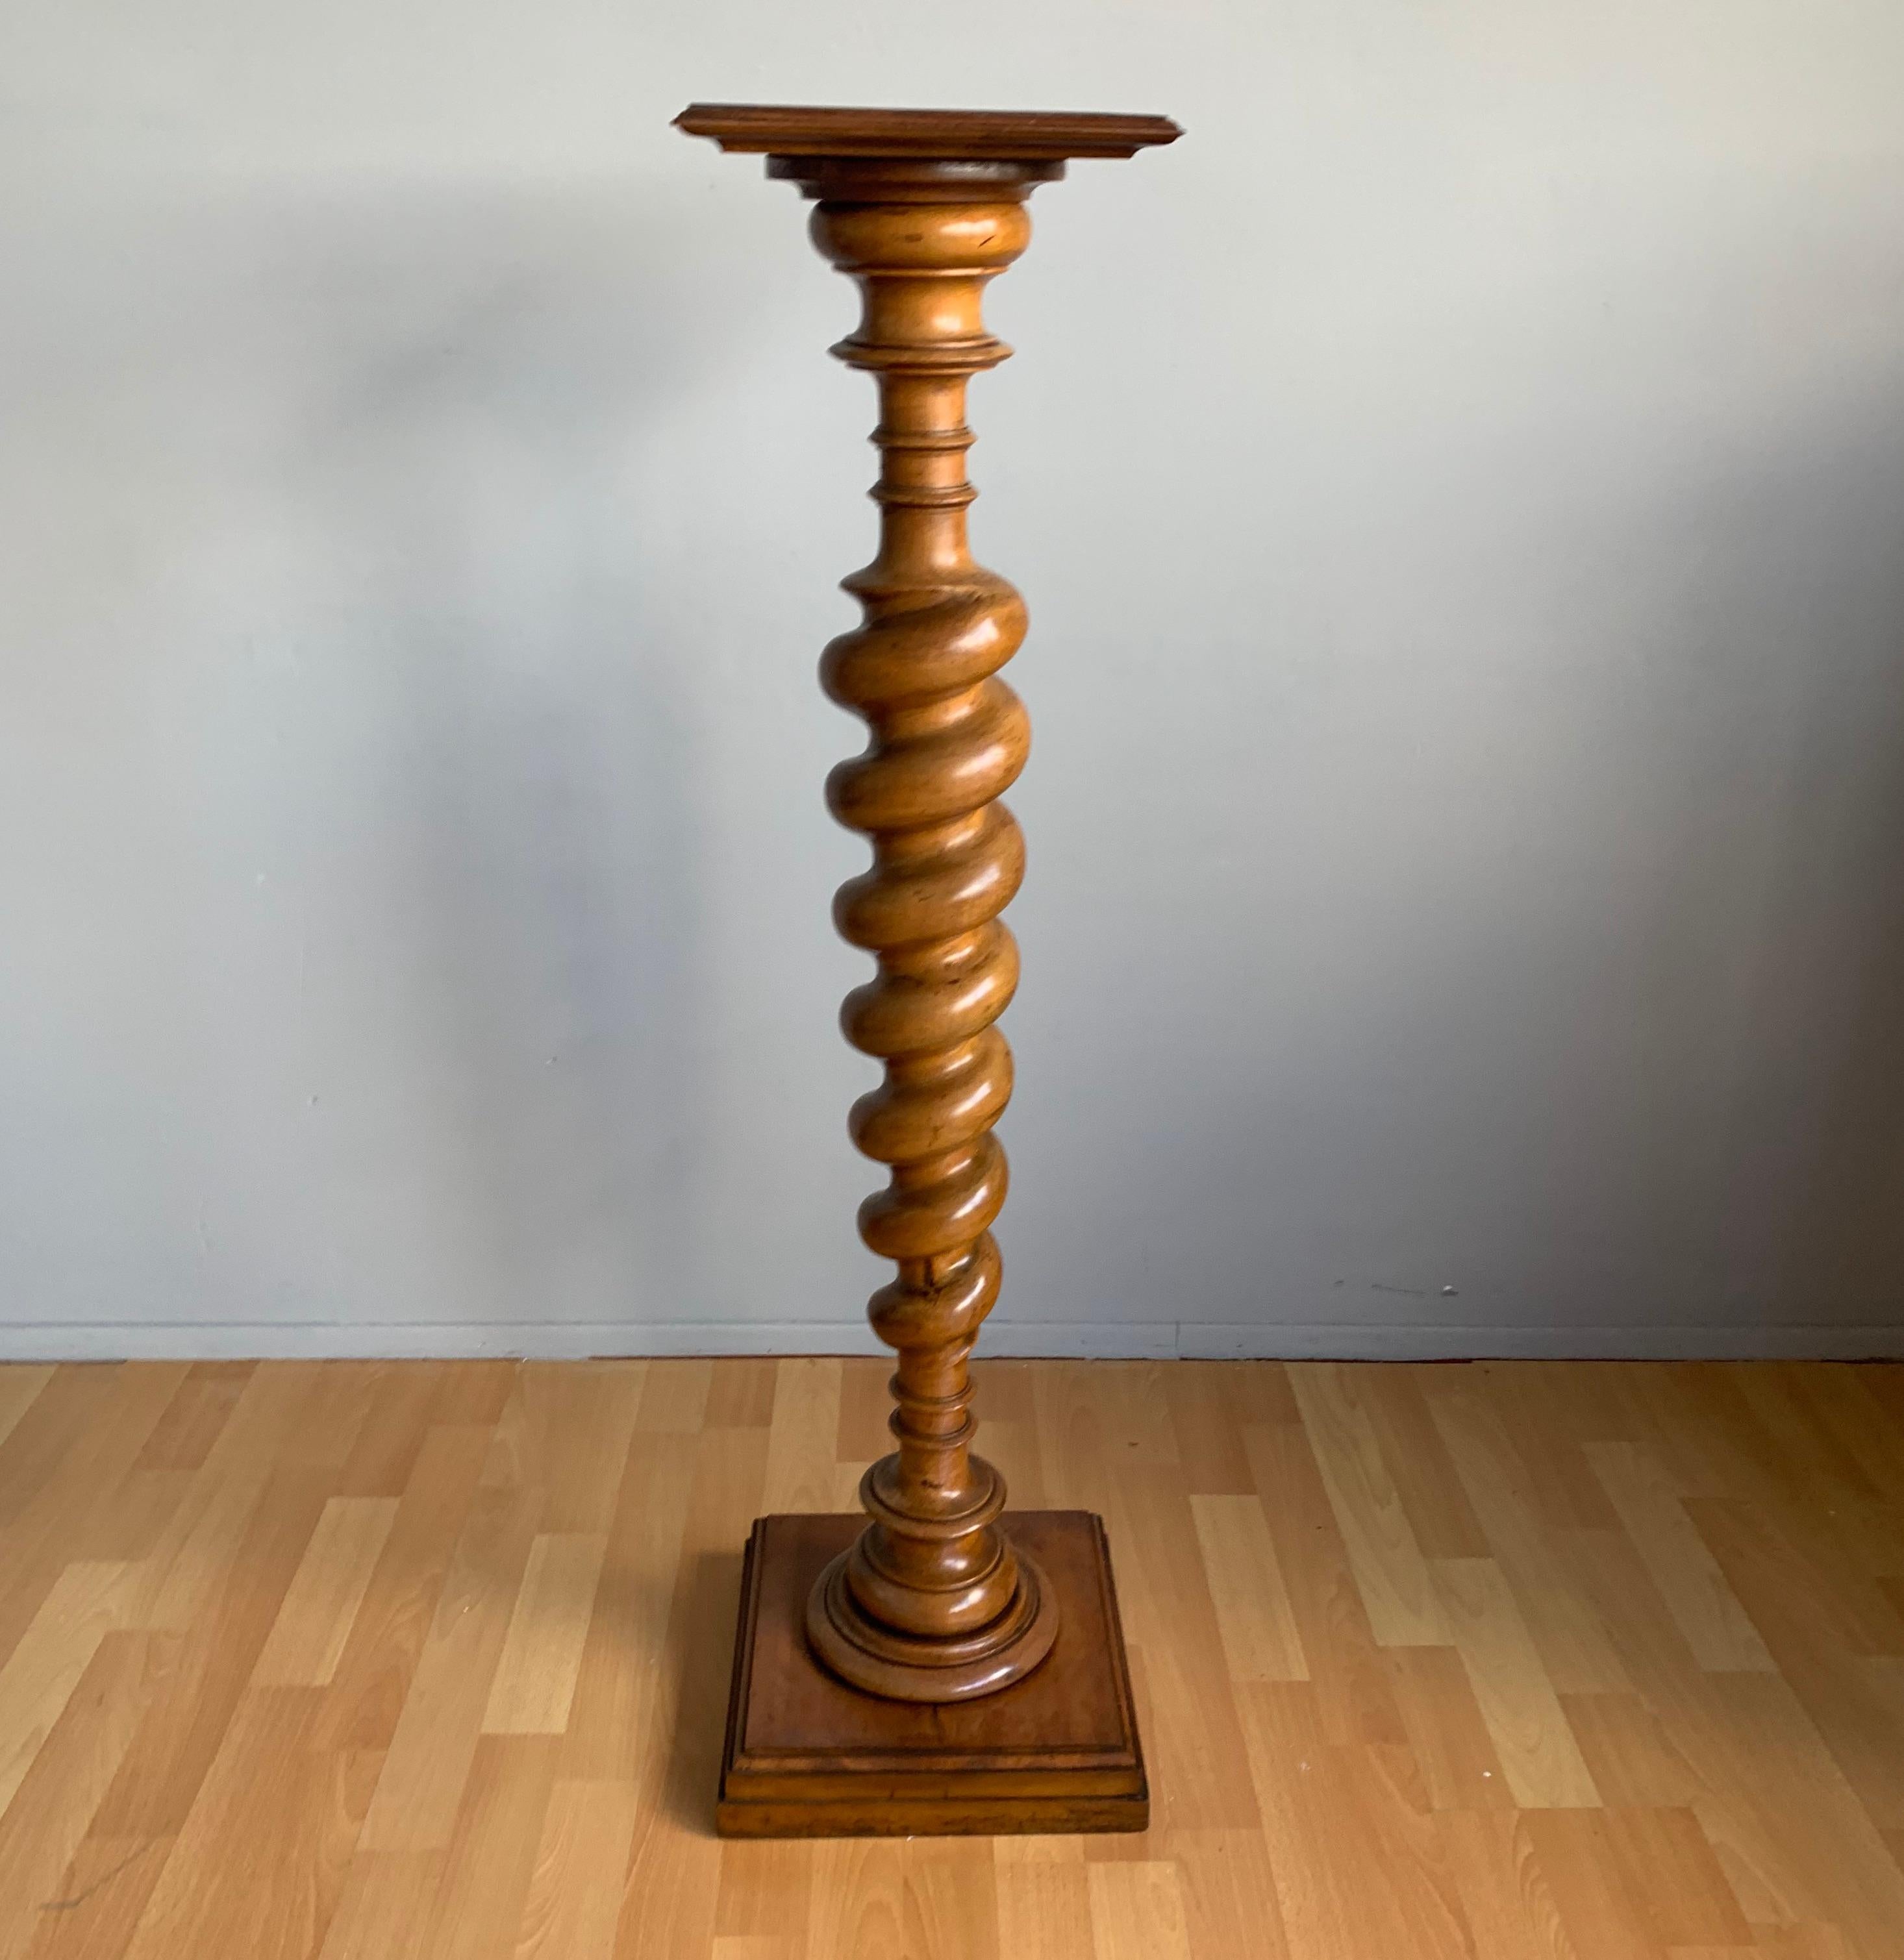 For the collectors and for the home decorators.

The design of this unique and all-handcrafted sculpture stand is simply wonderful, but the twist-shape and the patina take her to the next level. If you follow the small to the larges twist lines in